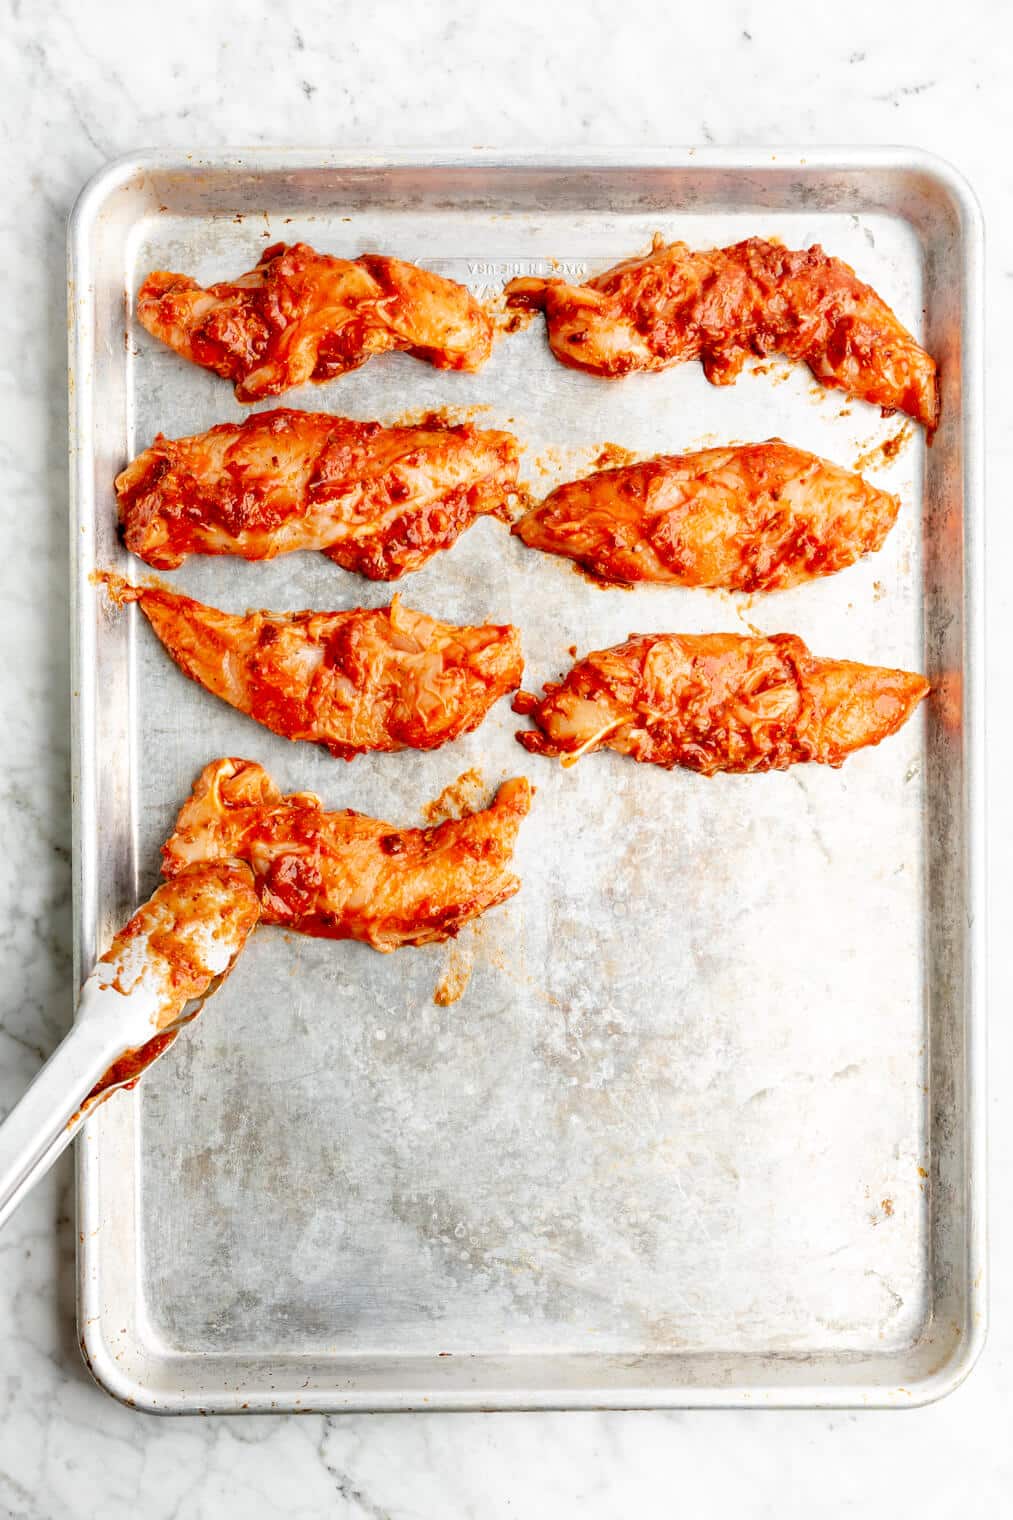 Tongs placing chicken coated in Tinga on a sheet pan